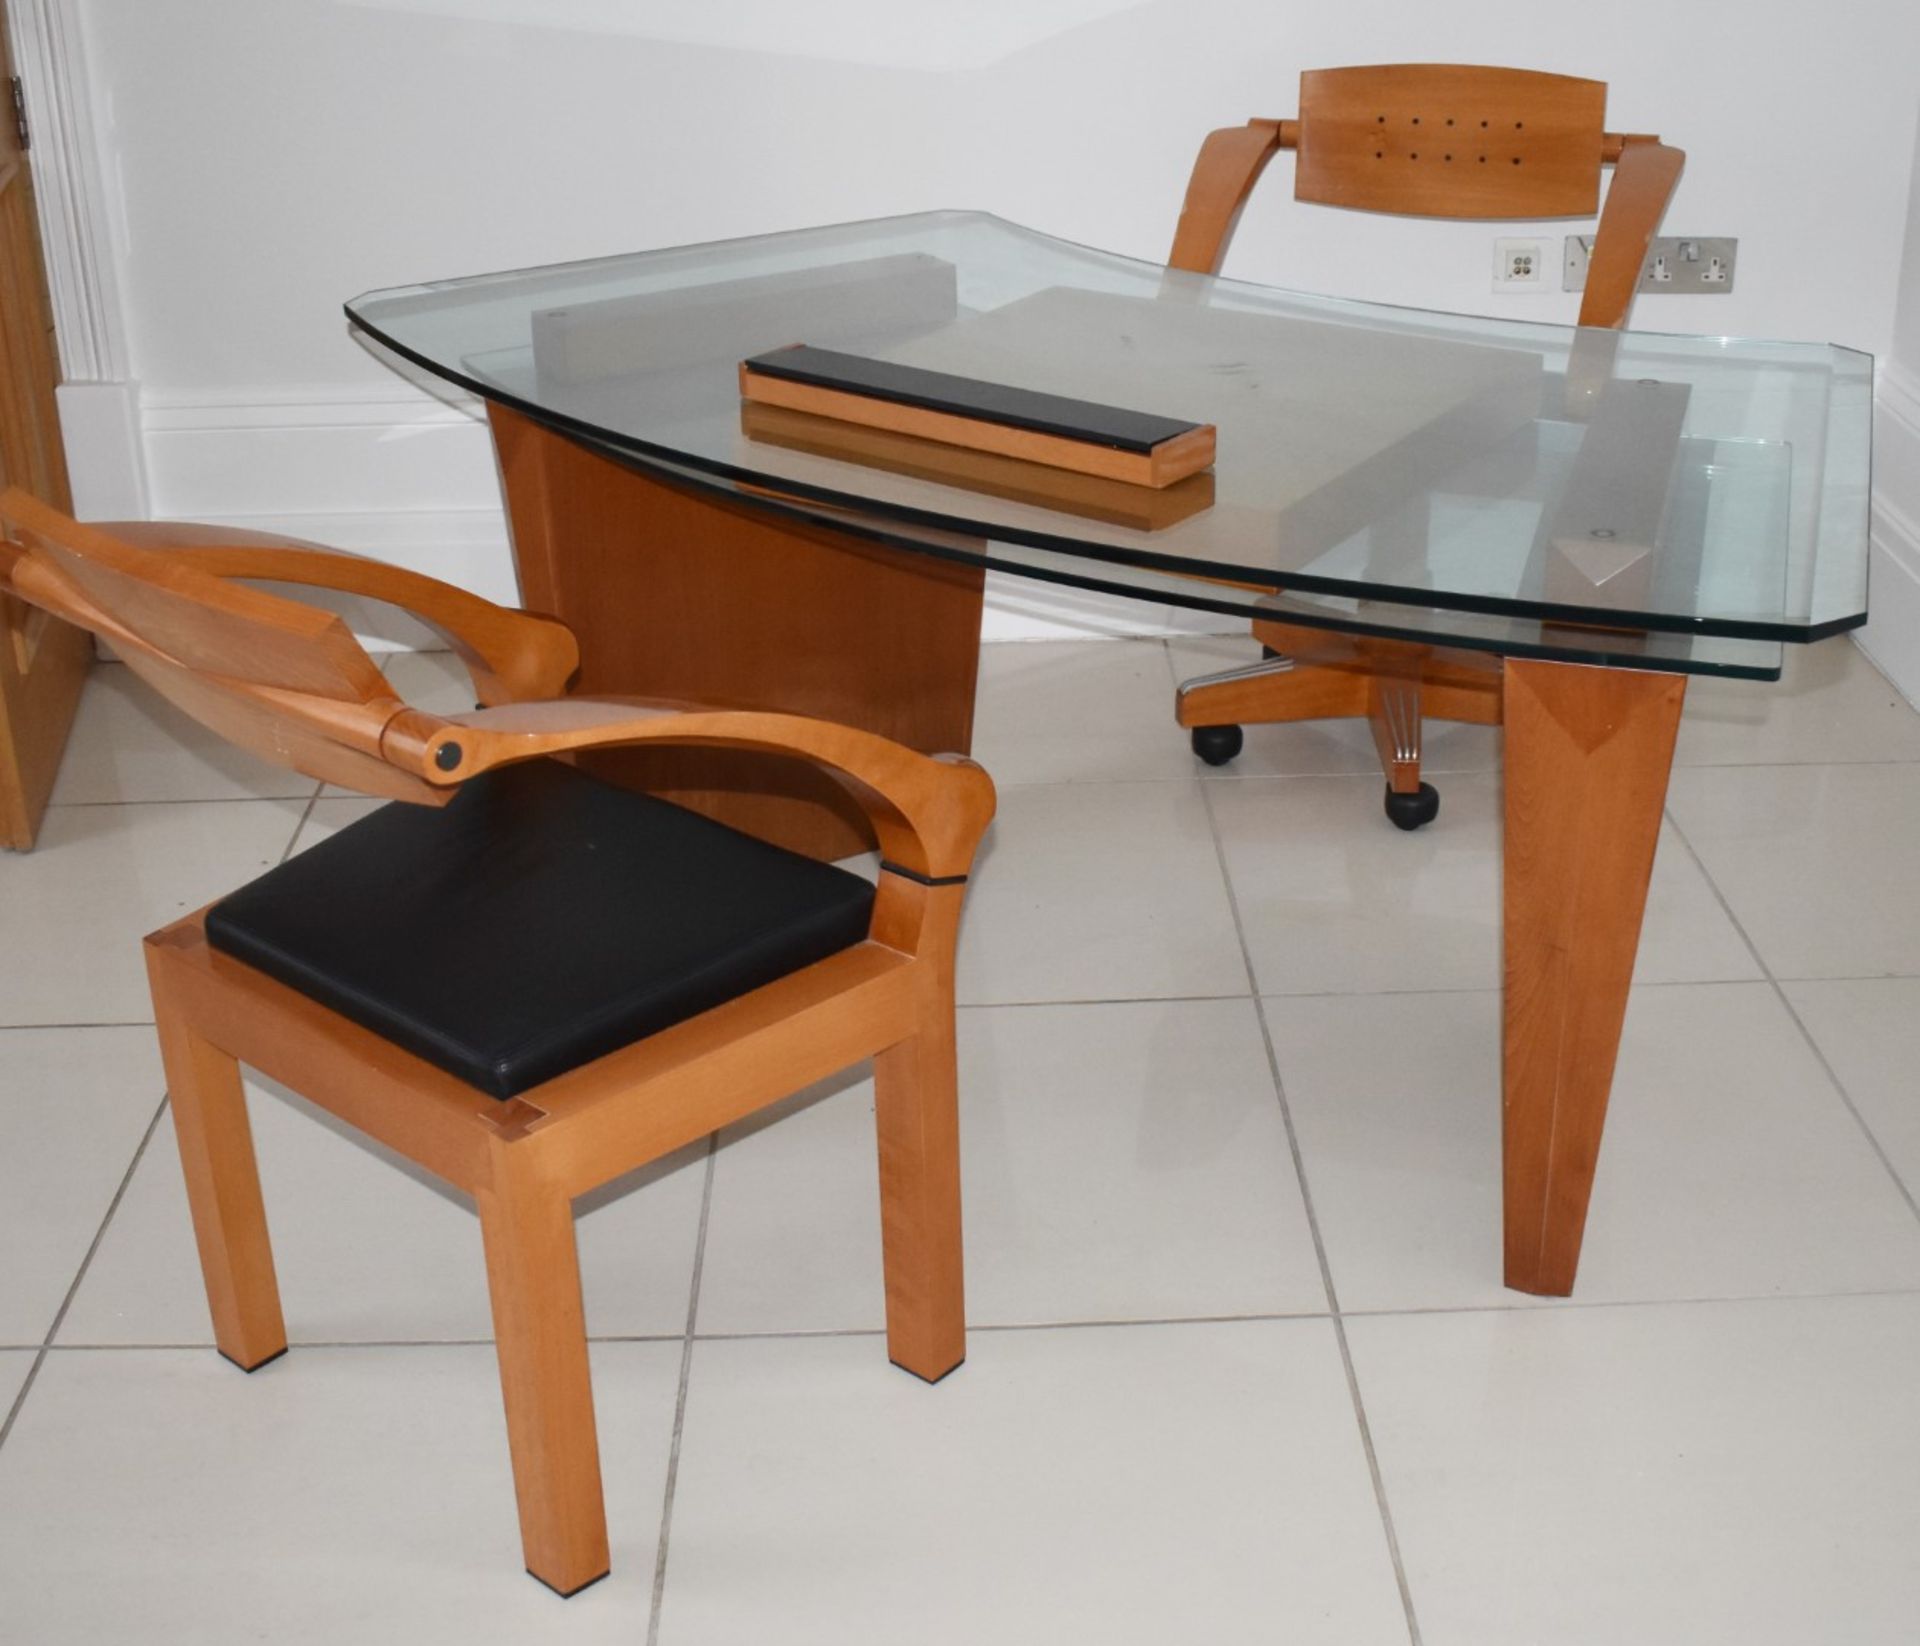 1 x Giorgetti Office Desk With Two Spring Chairs By Massimo Scolari - From an Exclusive Hale - Image 7 of 34